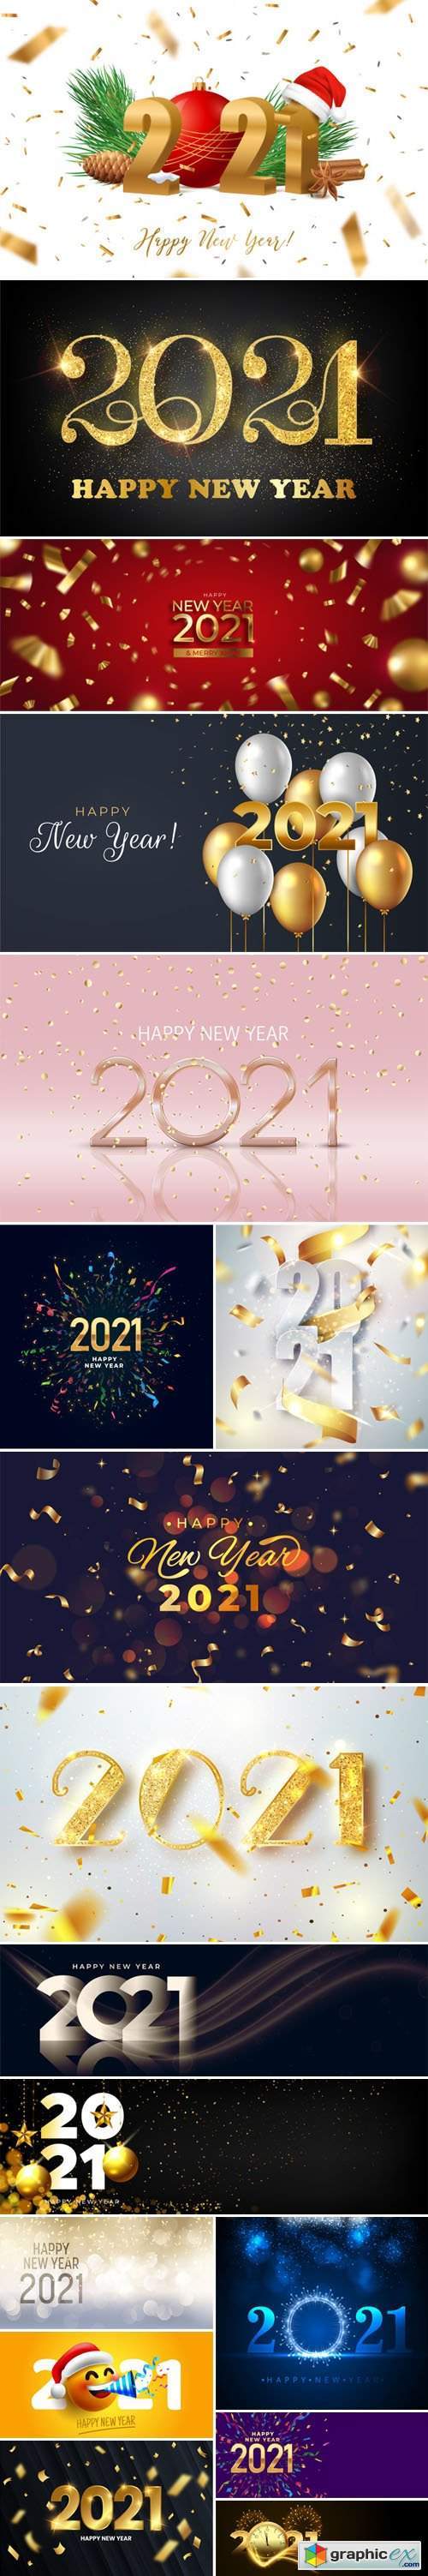 17 Happy New Year 2021 Backgrounds Vector Templates Collection